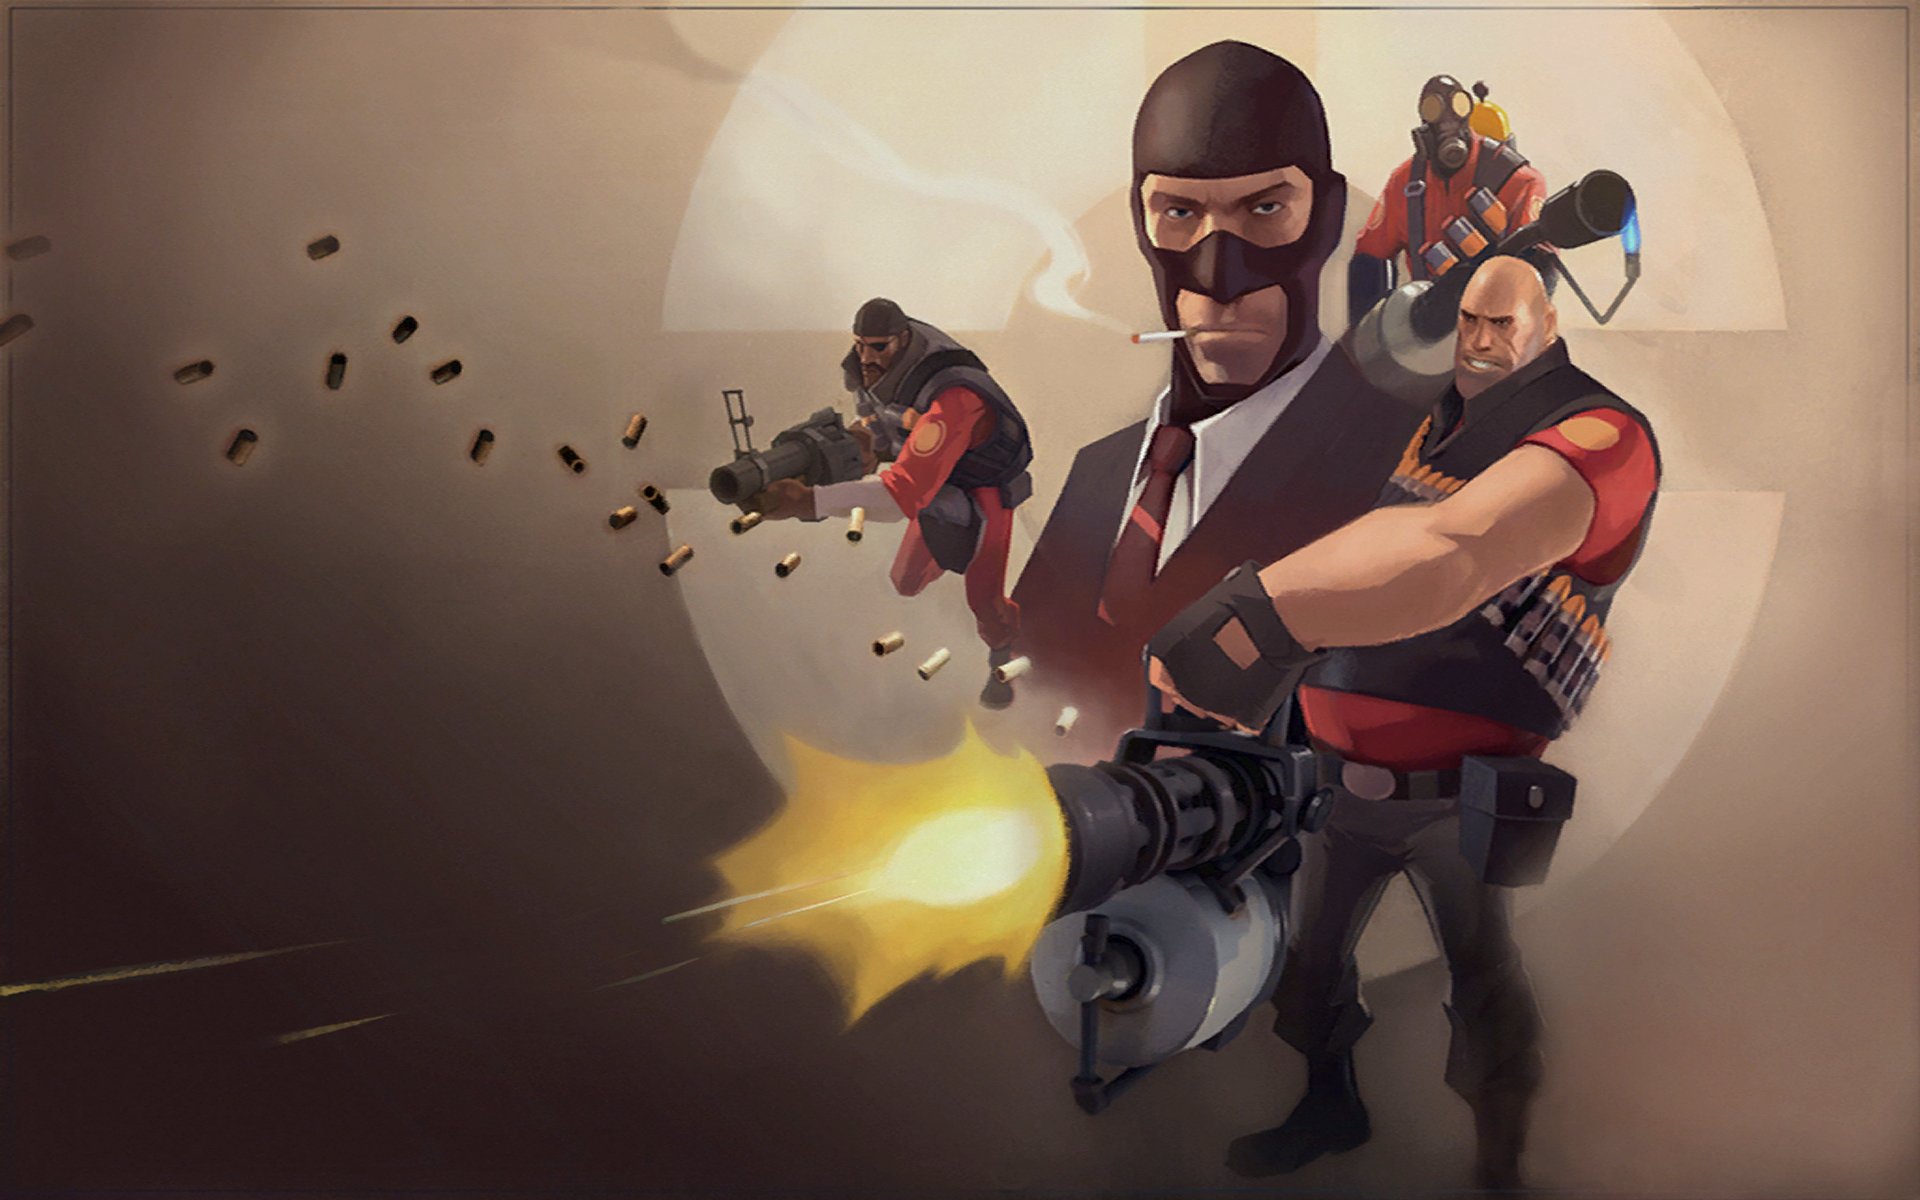 team fortress 2 classic download download free